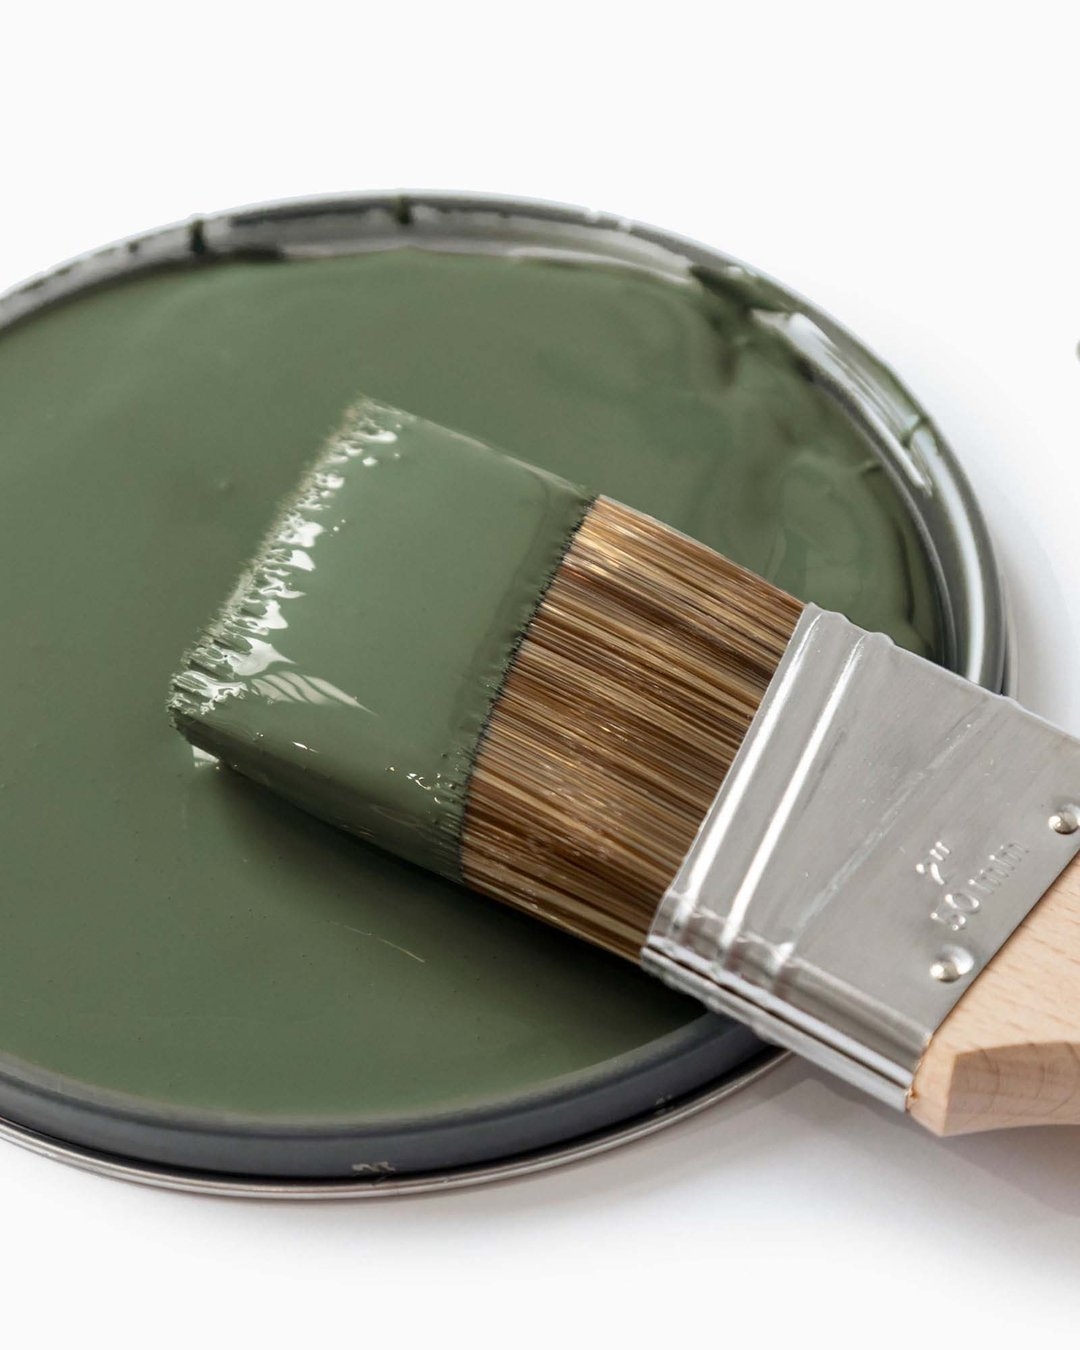 Clare x Pinterest: Daily Greens, Wall Paint Eggshell, Gallon - Image 2